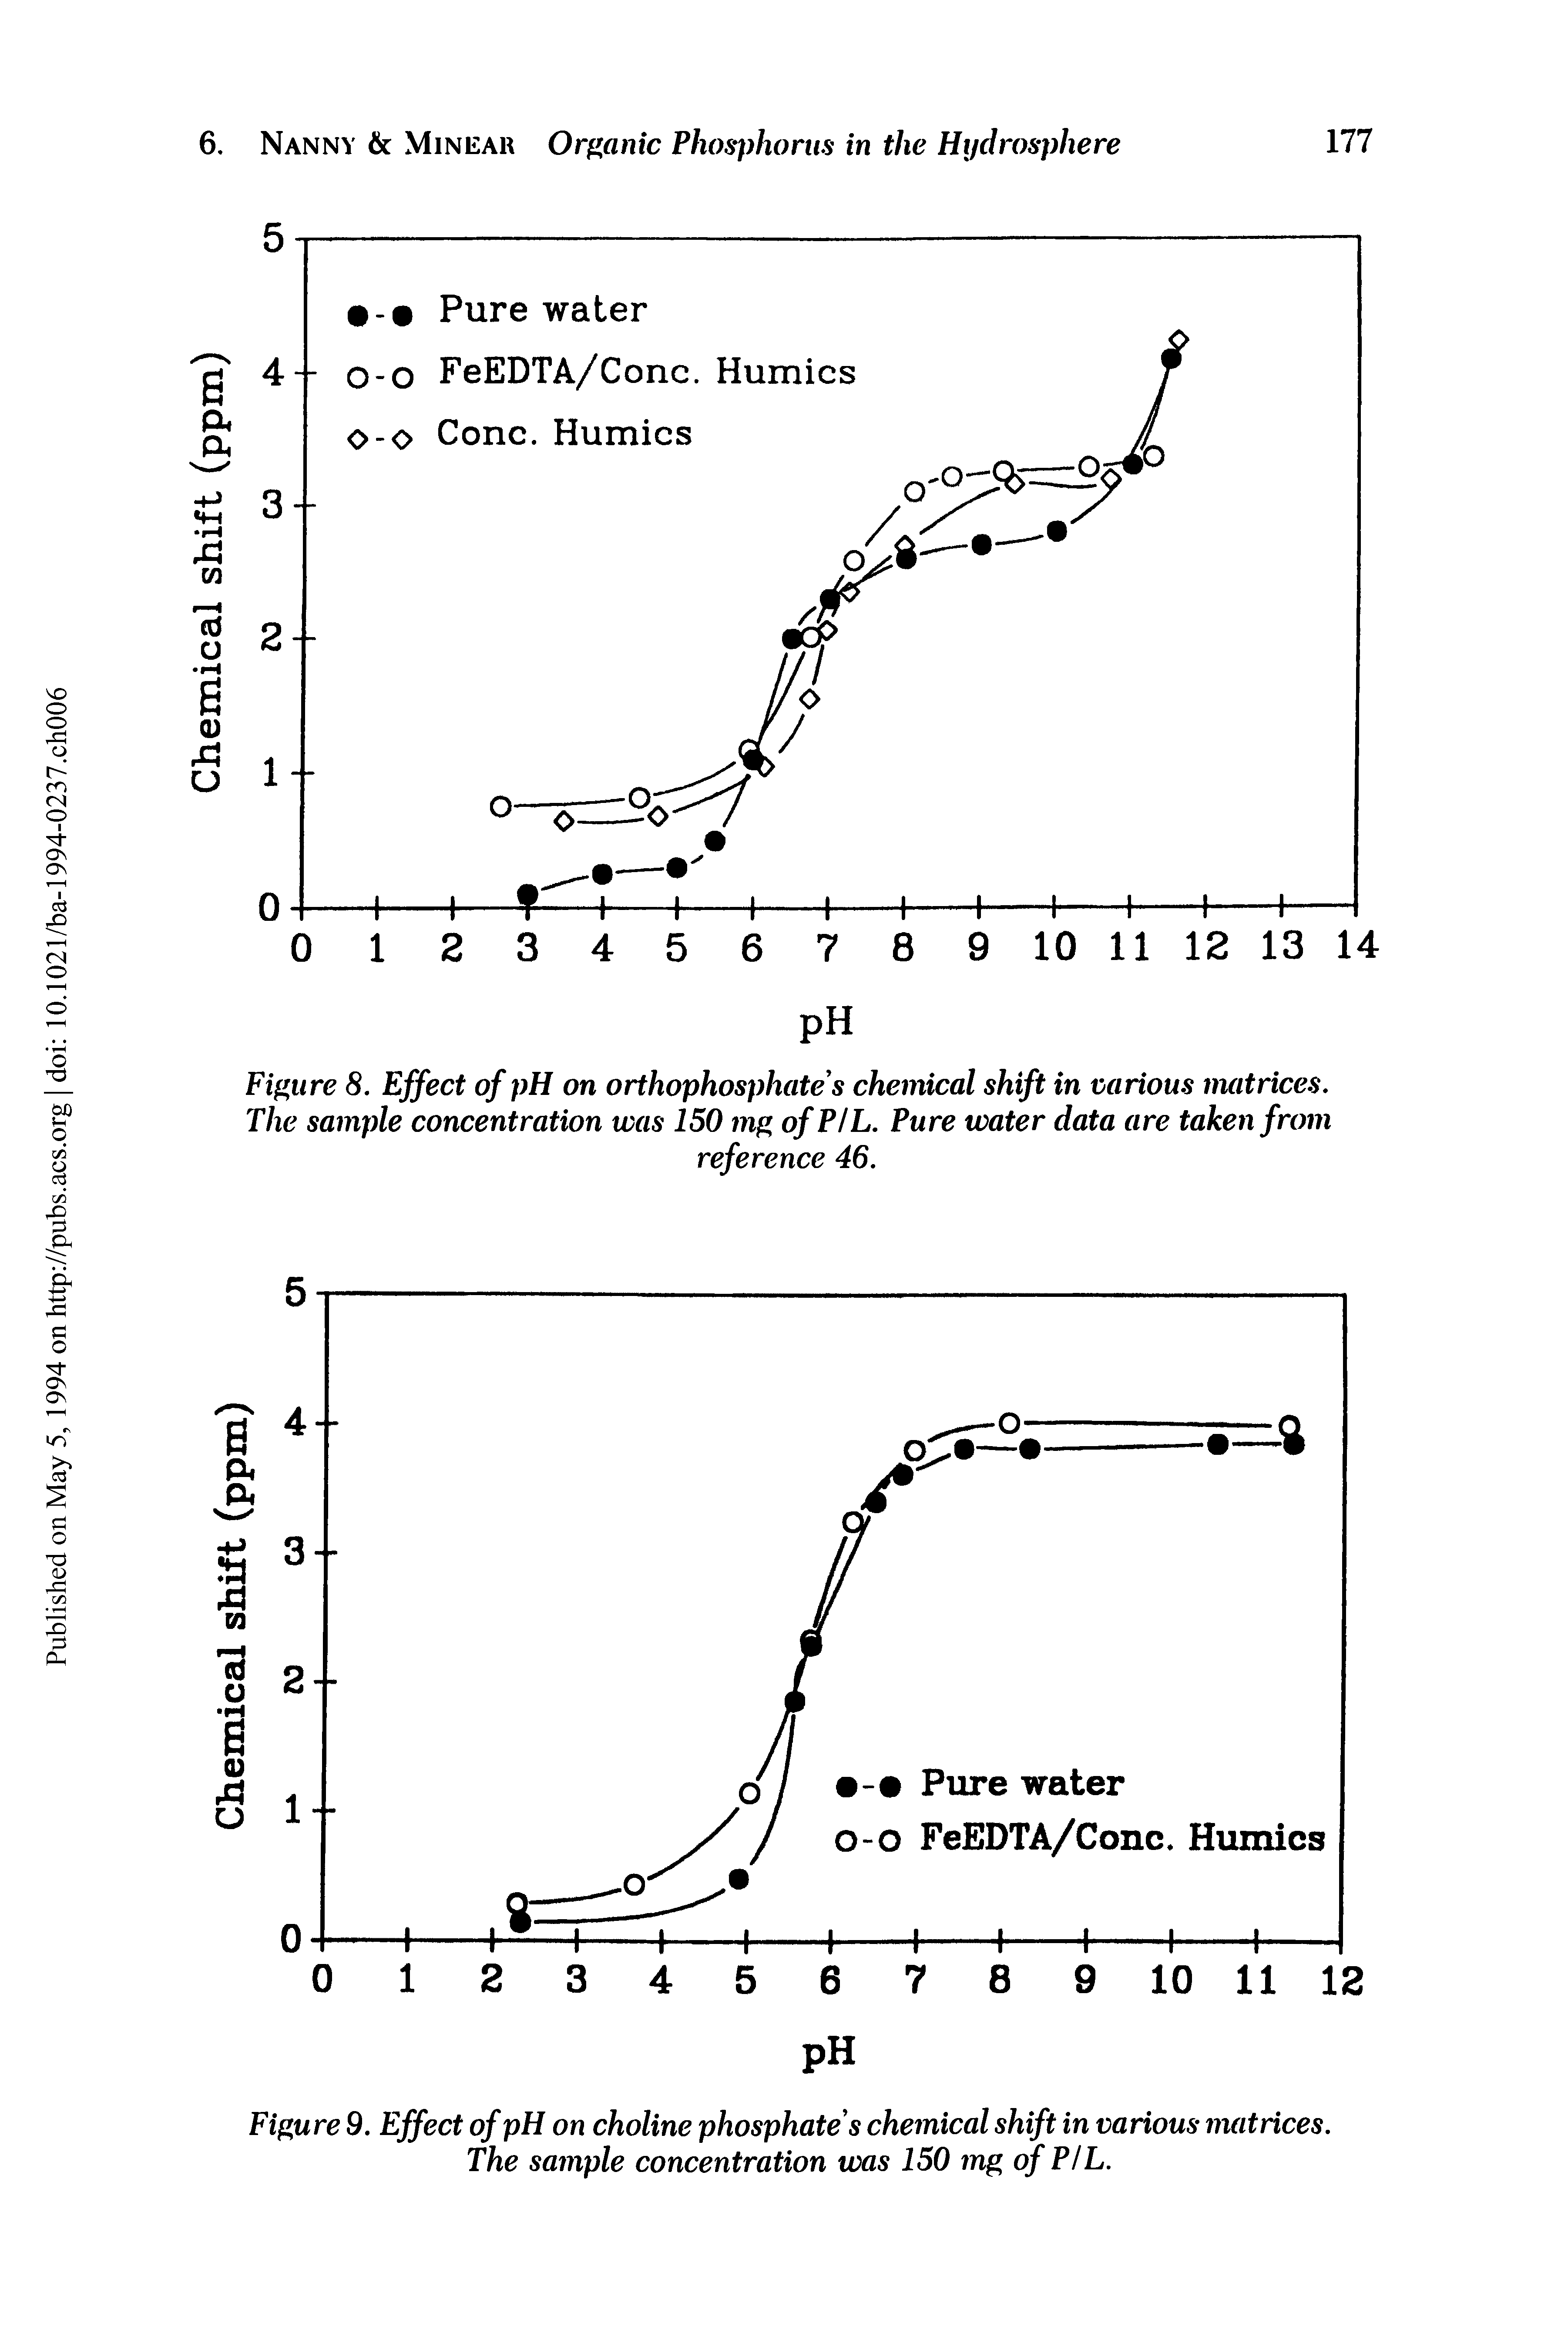 Figure 9. Effect of pH on choline phosphate s chemical shift in various matrices. The sample concentration was 150 mg of P/L.